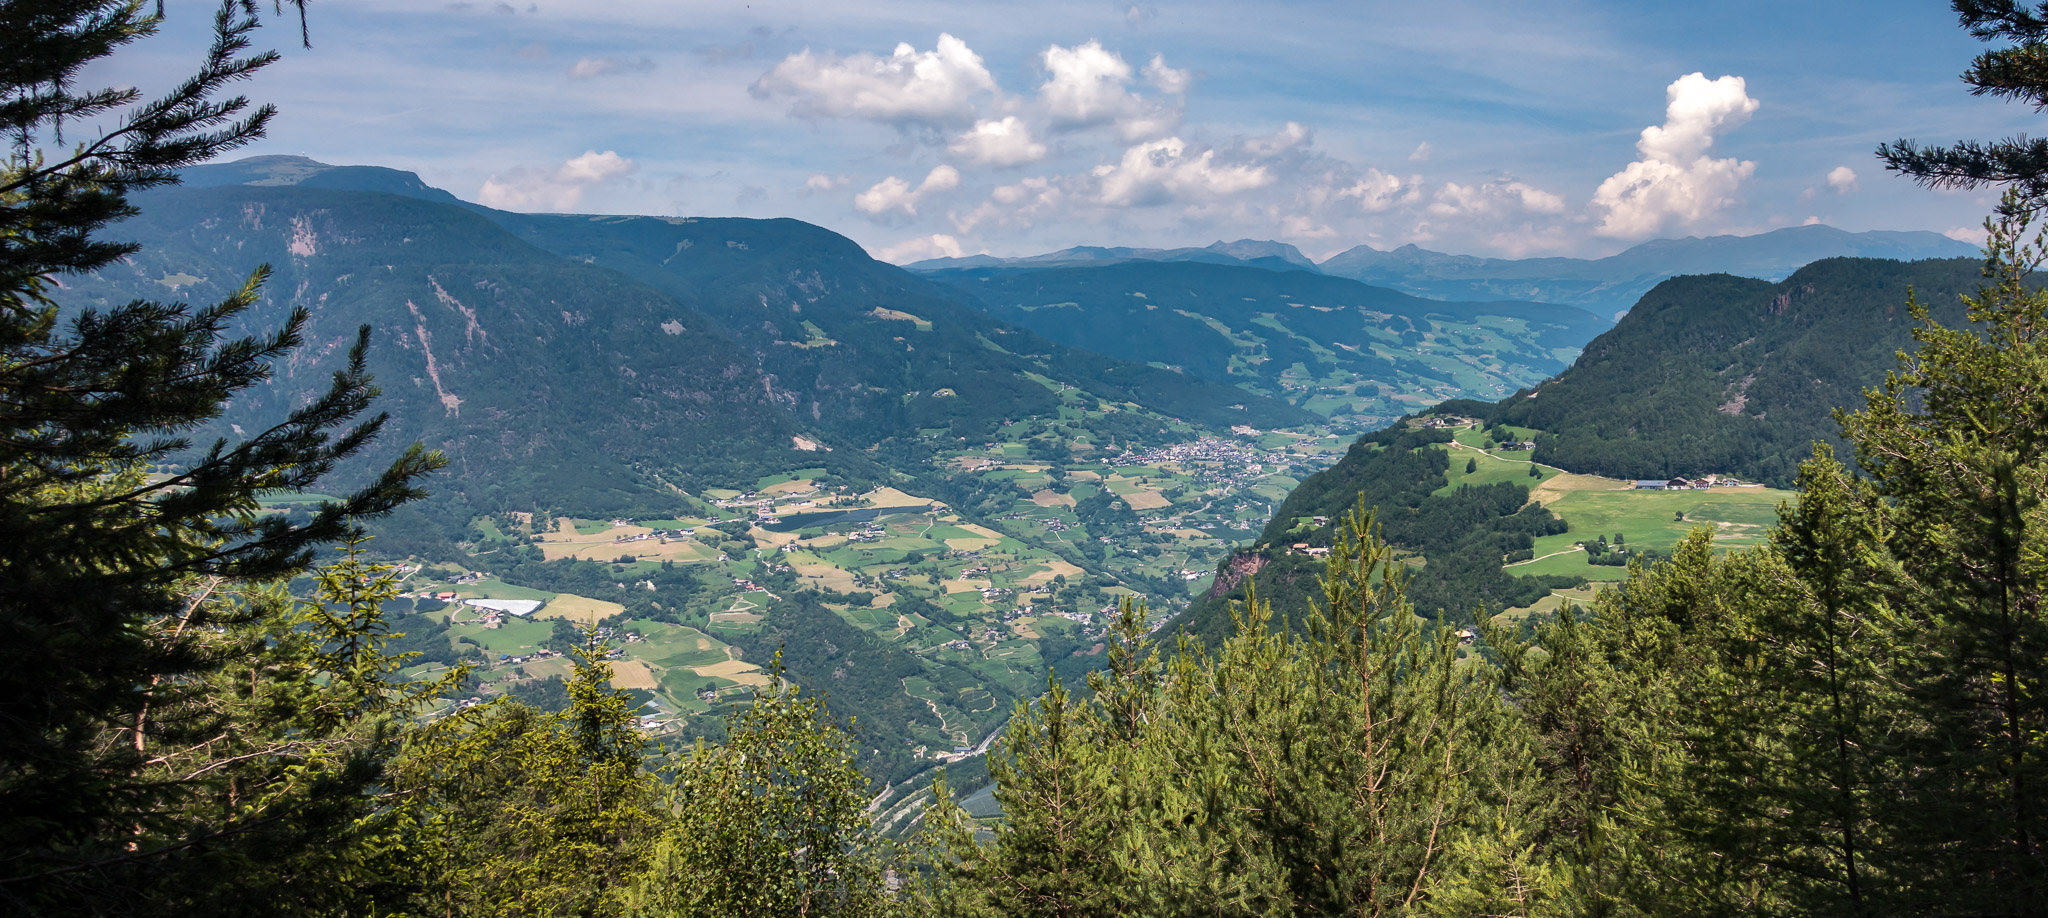 Adige Valley from above Kastelruth